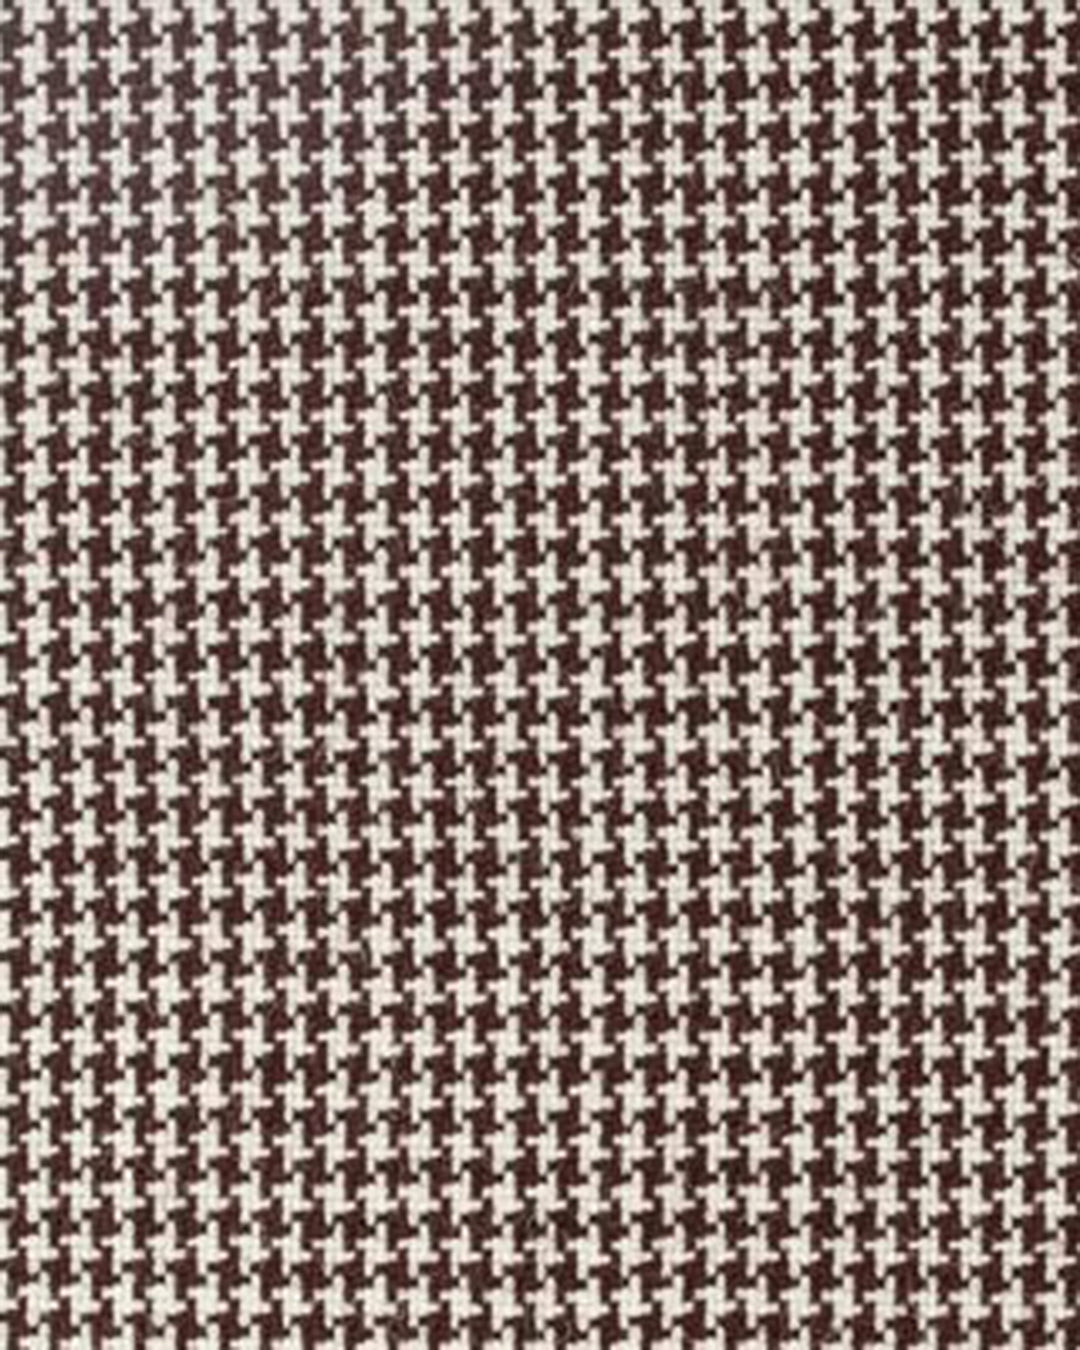 Dugdale Fine Worsted - Brown Houndstooth